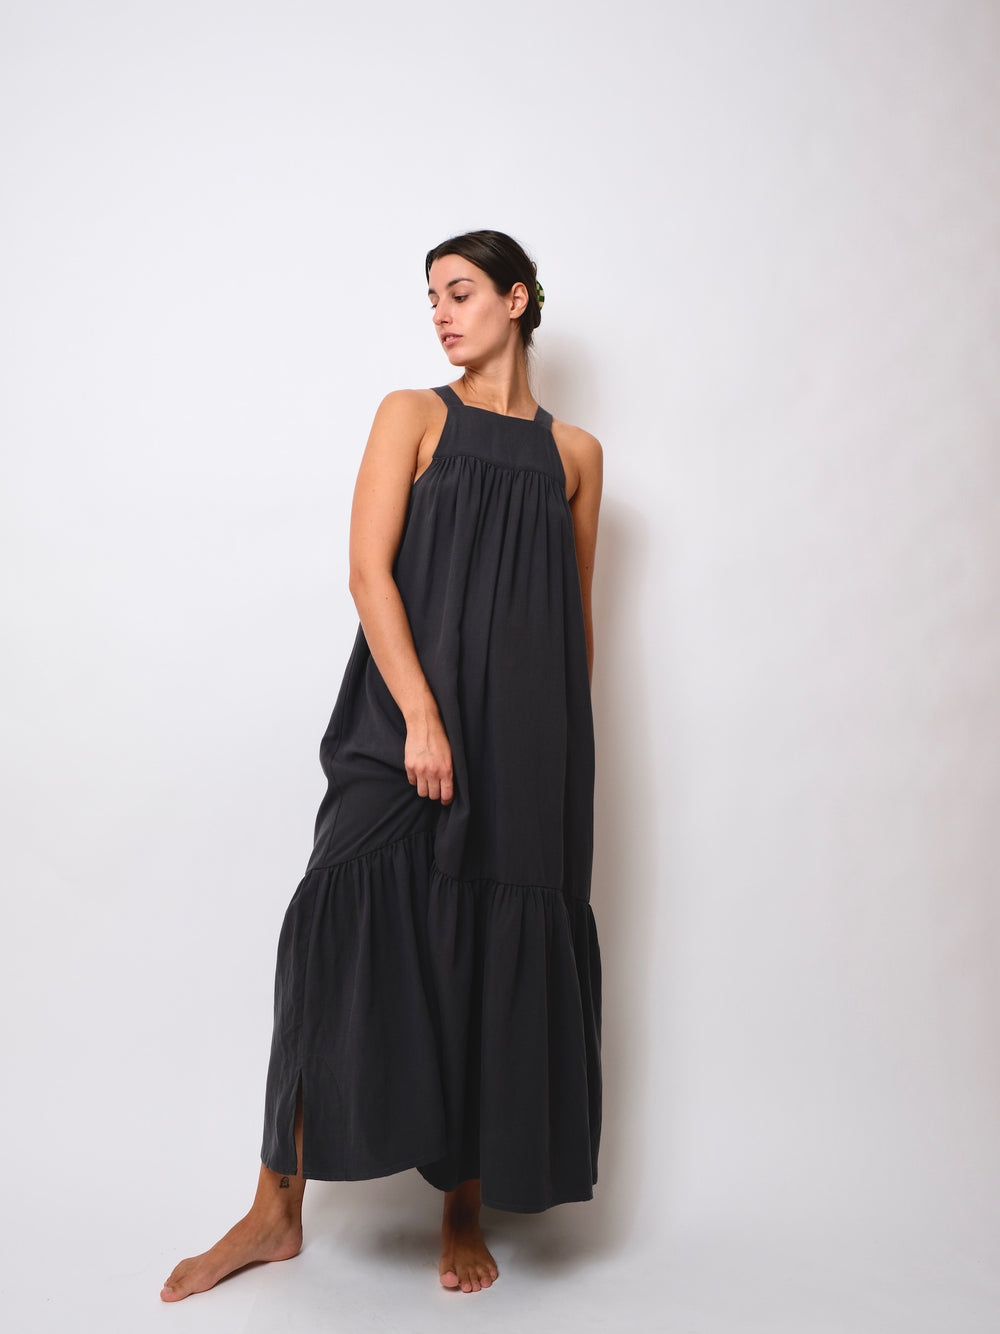 Women wearing the ZW Tier Dress sewing pattern from Birgitta Helmersson on The Fold Line. A dress pattern made in cotton, linen, silk or viscose fabrics, featuring thin shoulder straps, square neck, above-the-bust self-lined panel, A-line shape, gathered 